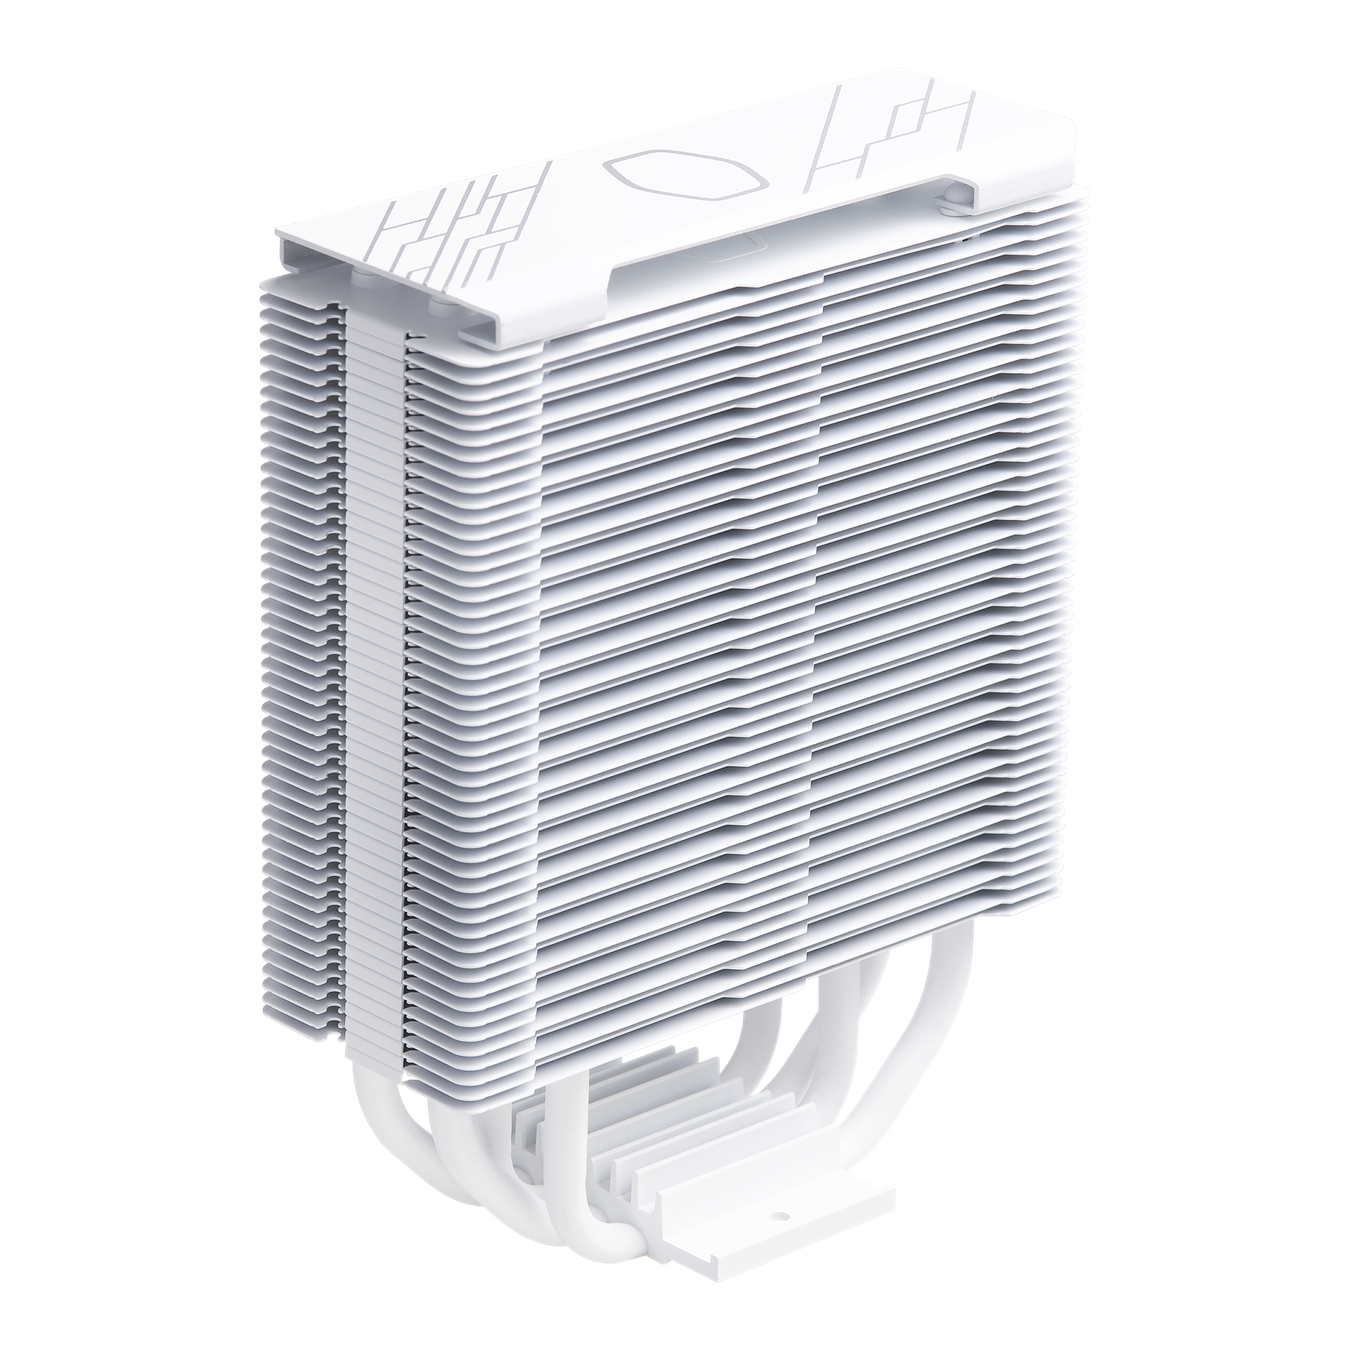 Hyber 212 Halo White - White Coated Heat Pipes